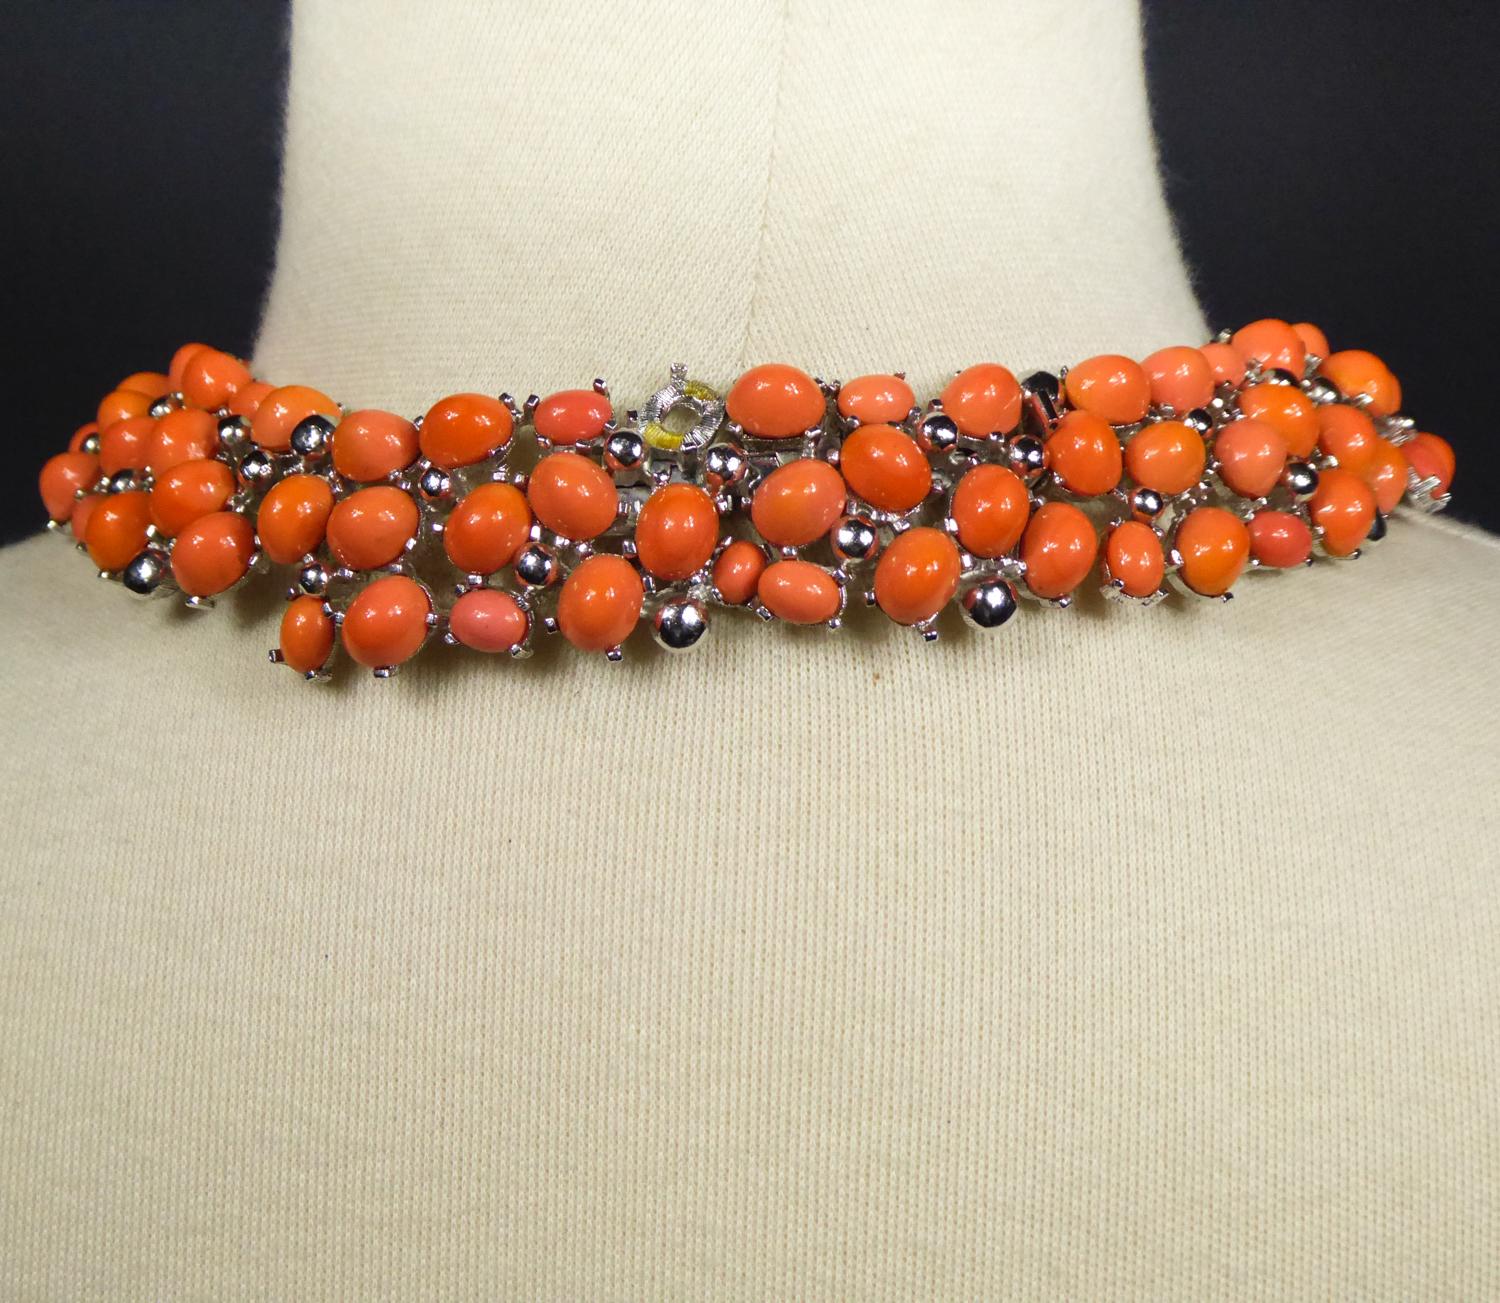 A Carven Haute Couture Necklace in glass Beads Circa 1960/1970 9